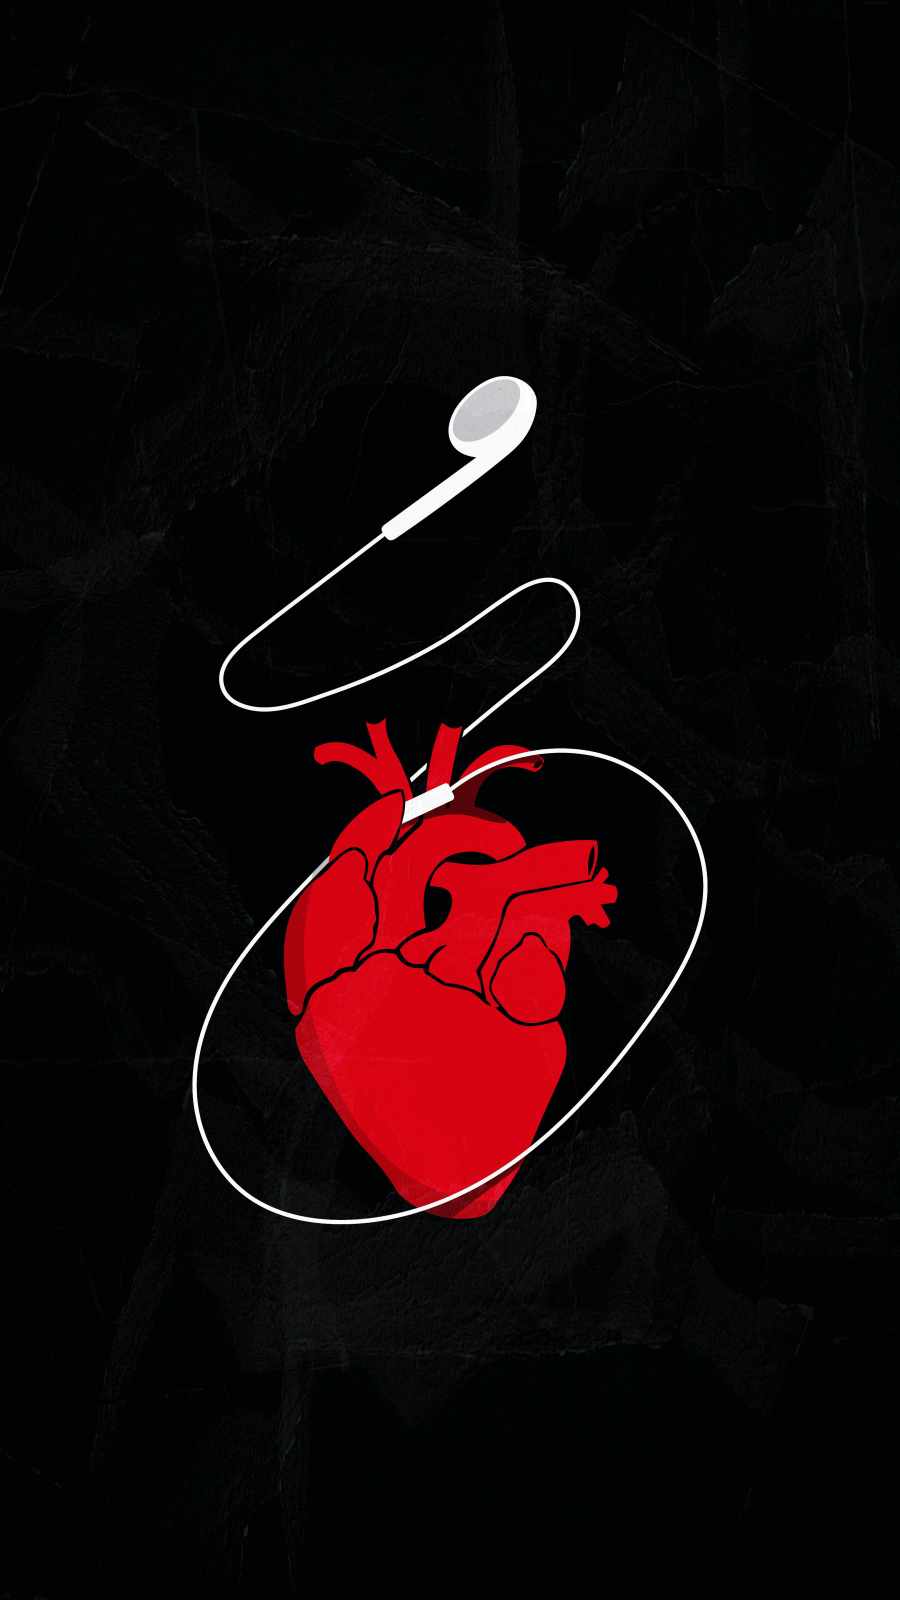 Heart Music Connection - IPhone Wallpapers : iPhone Wallpapers